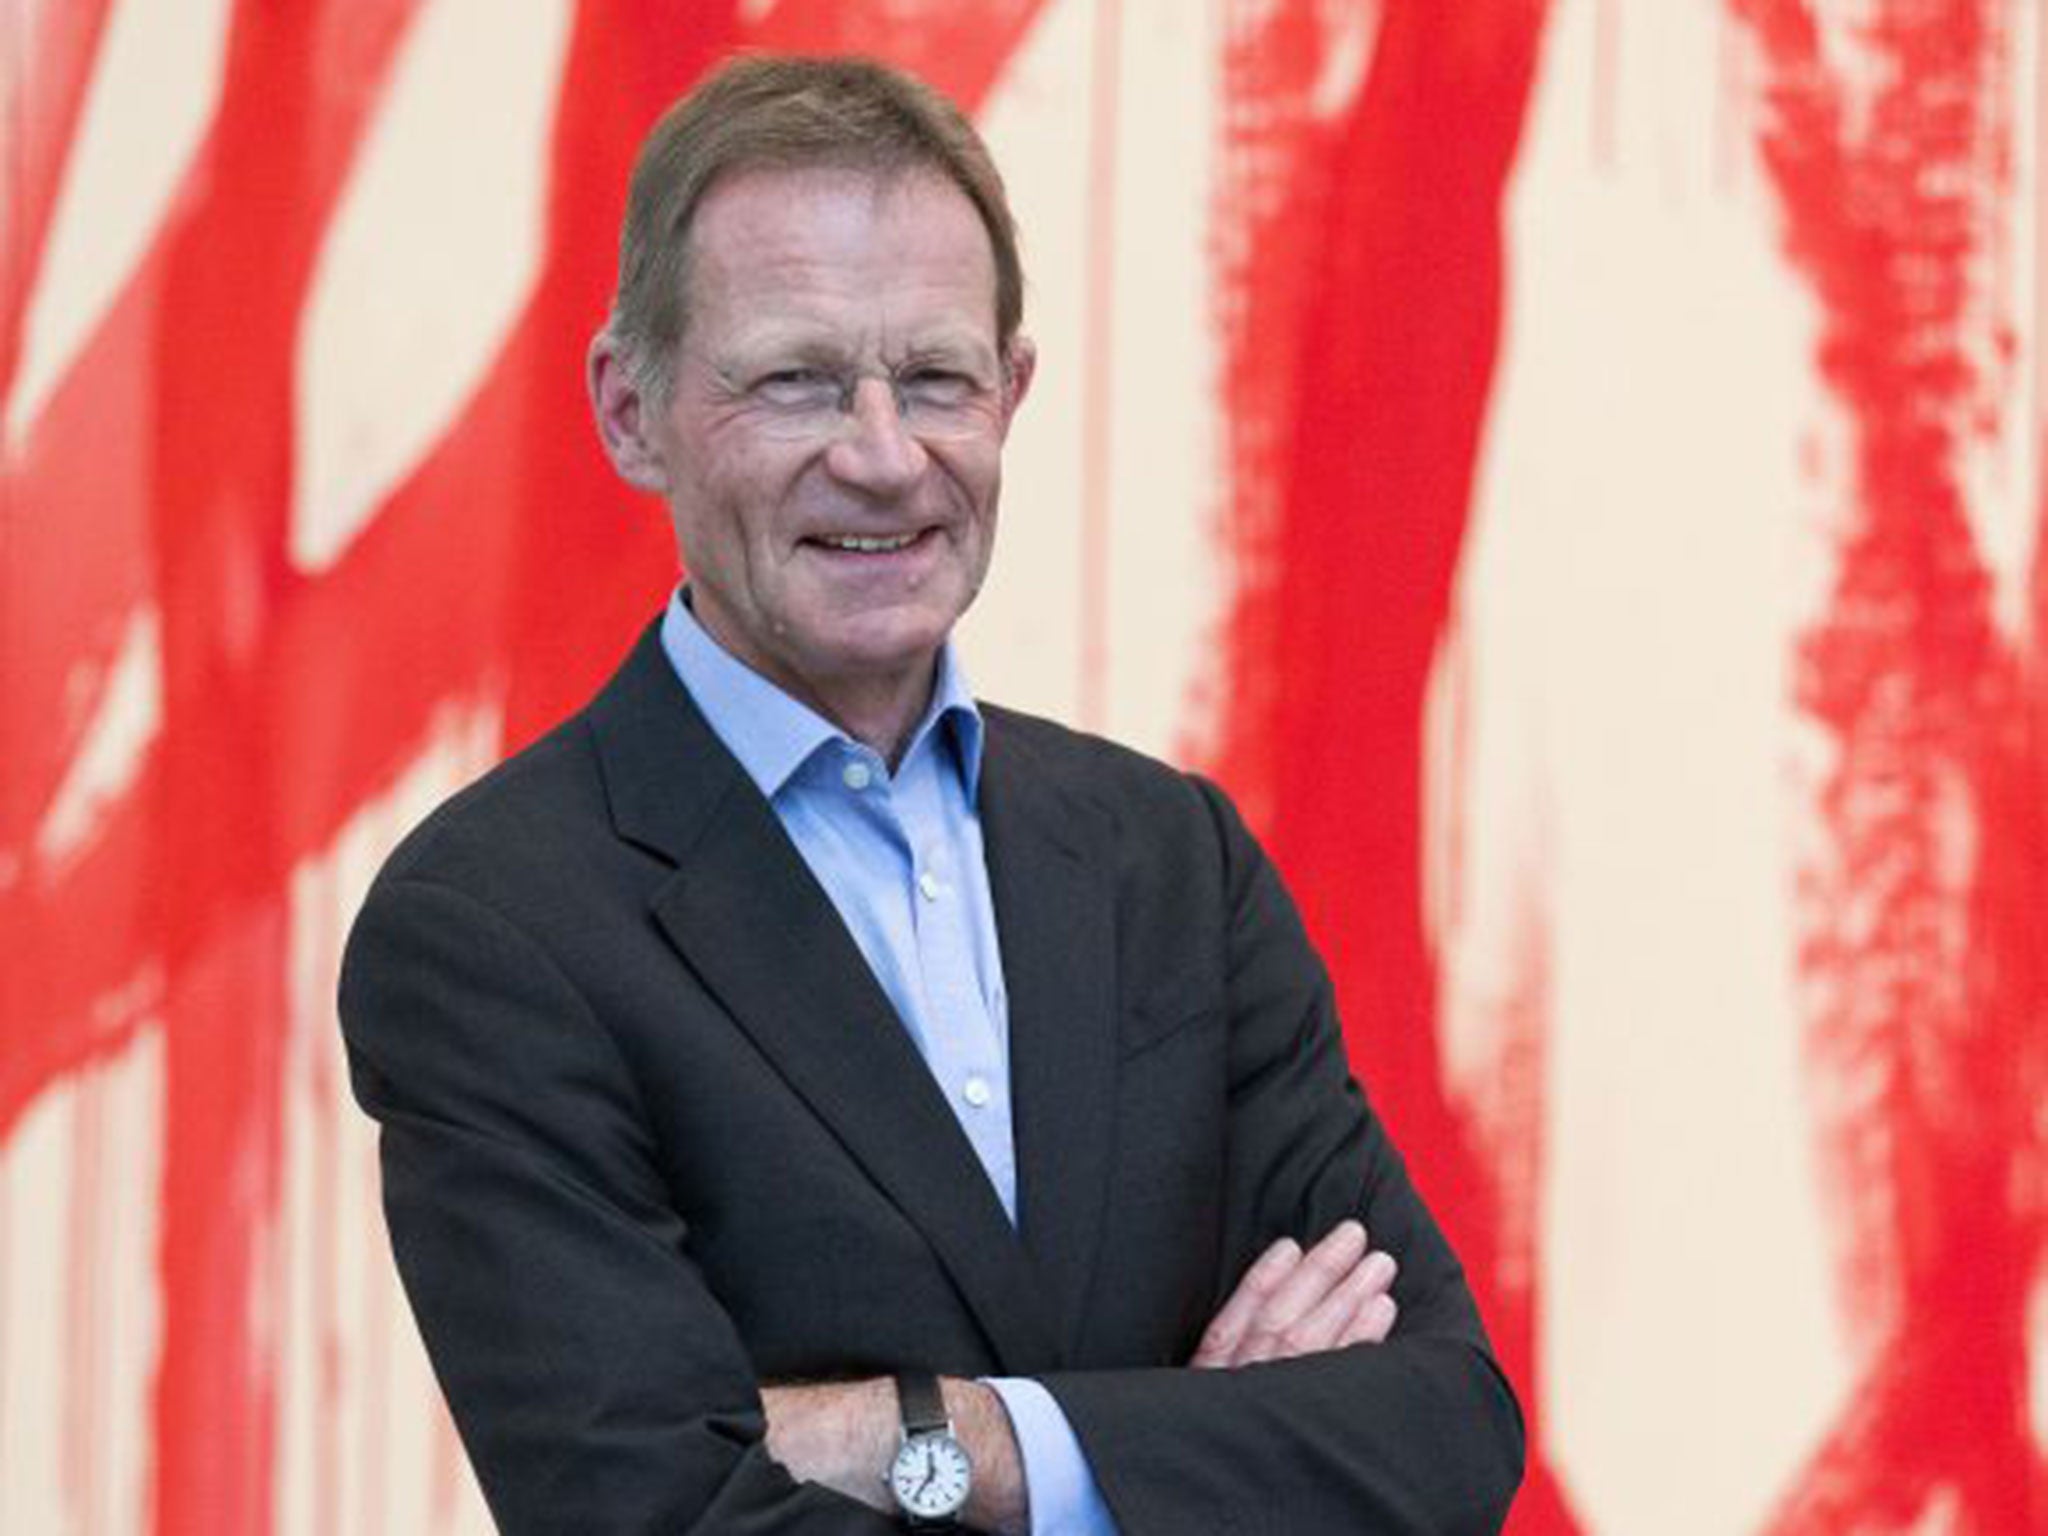 Sir Nicholas Serota has been a feature in the Power 100 top ten since its 2002 launch